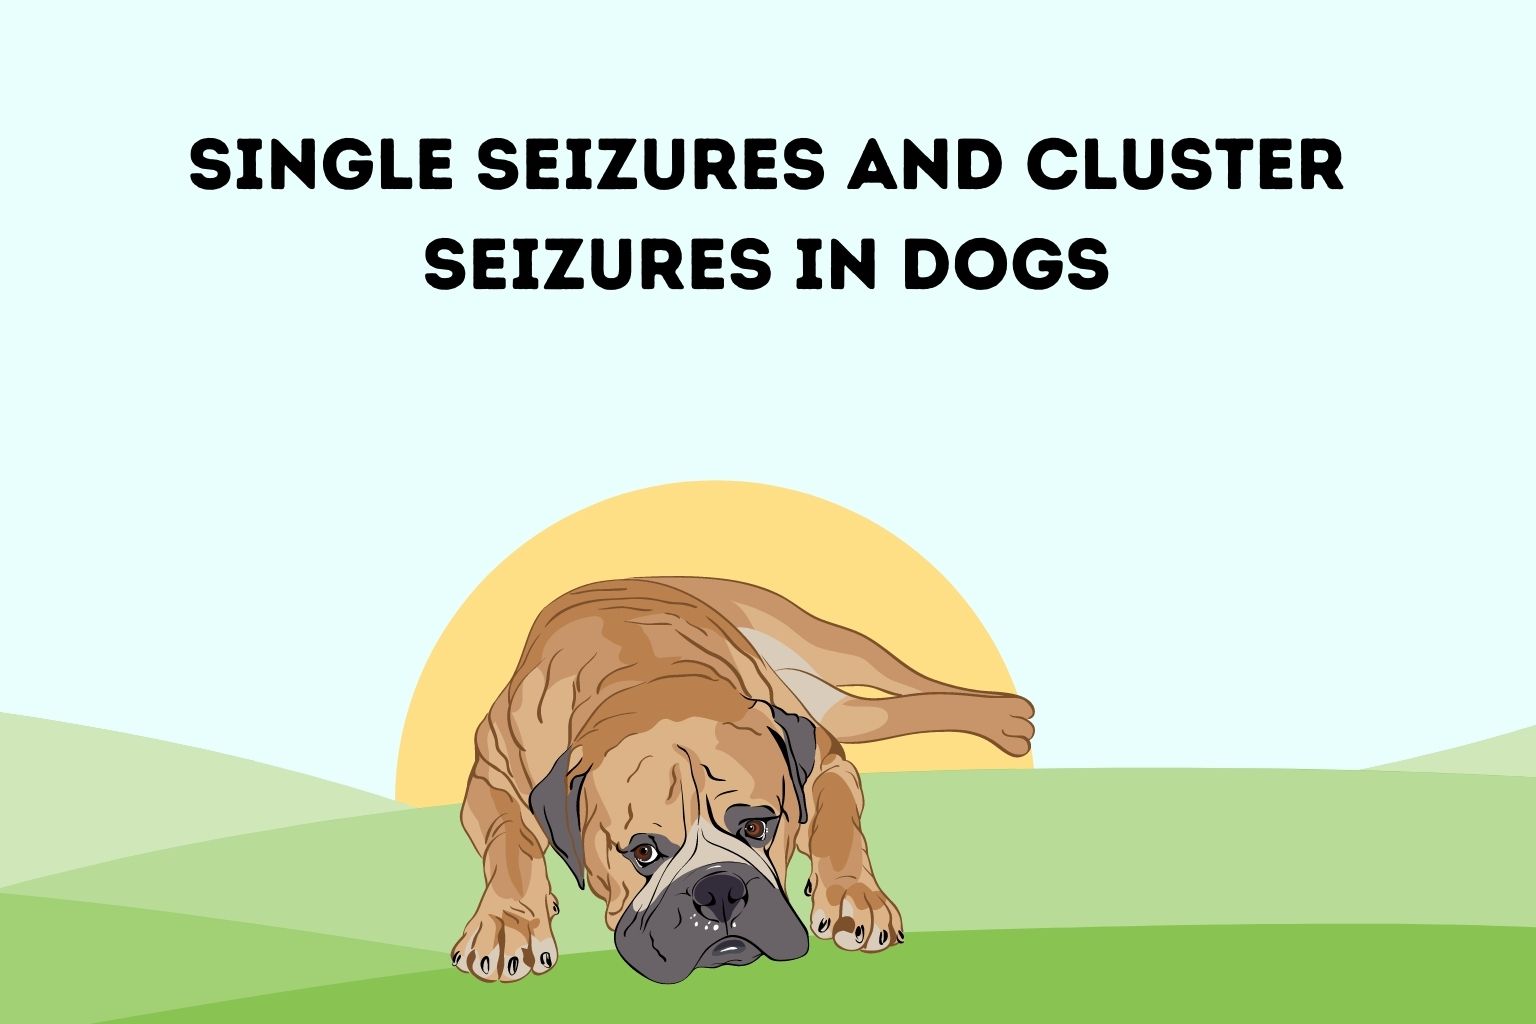 Single Seizures and Cluster Seizures in Dogs